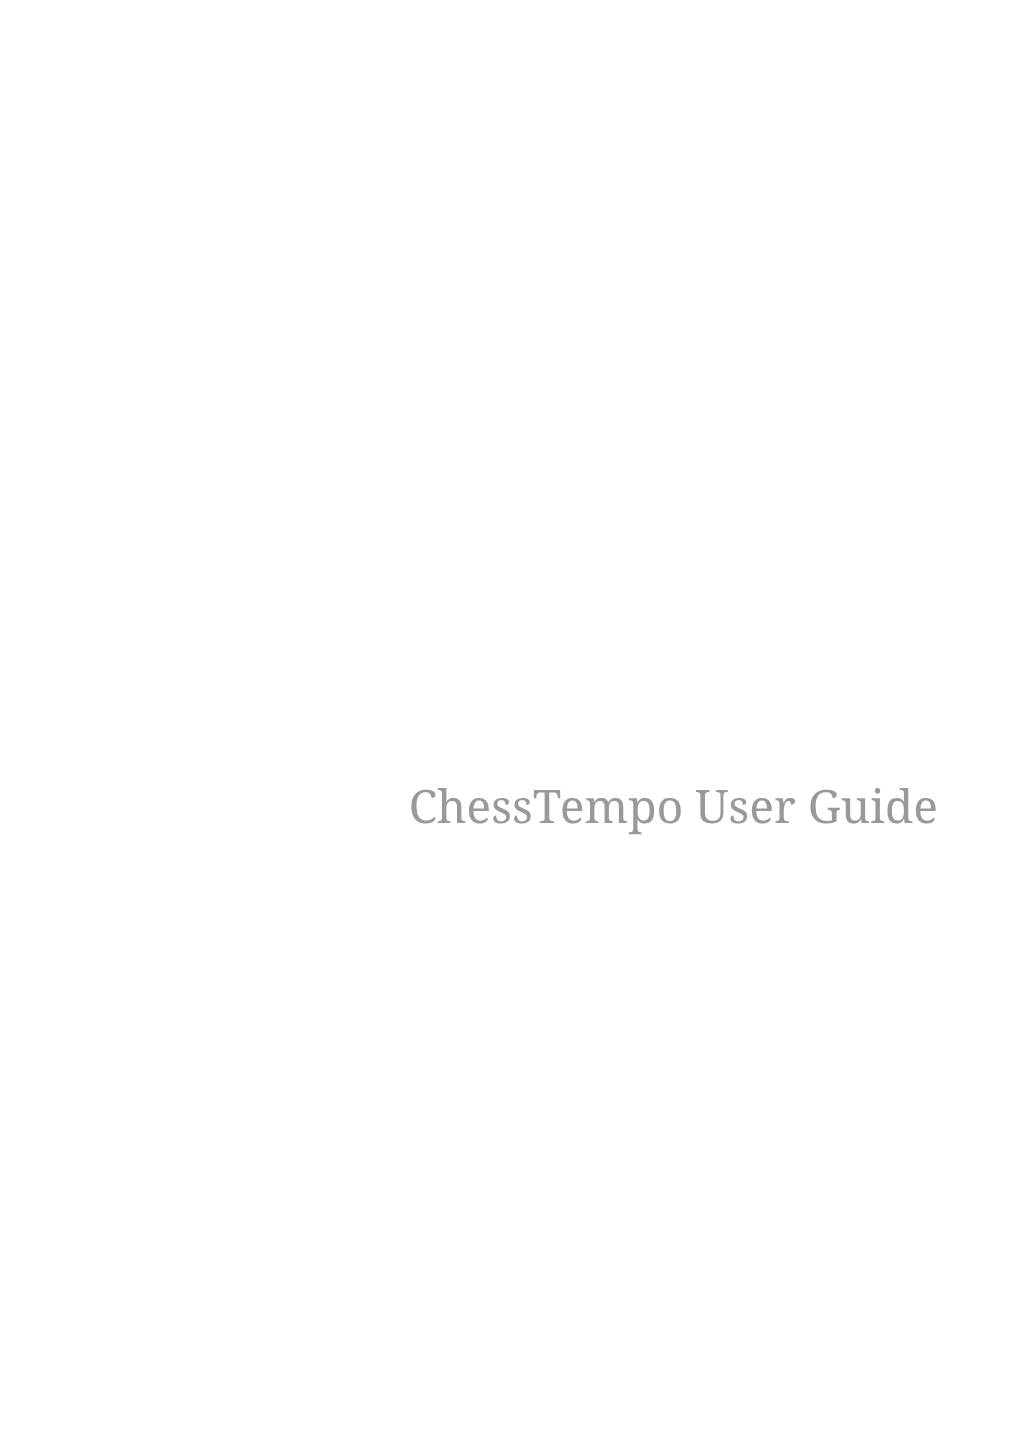 Chesstempo User Guide Table of Contents